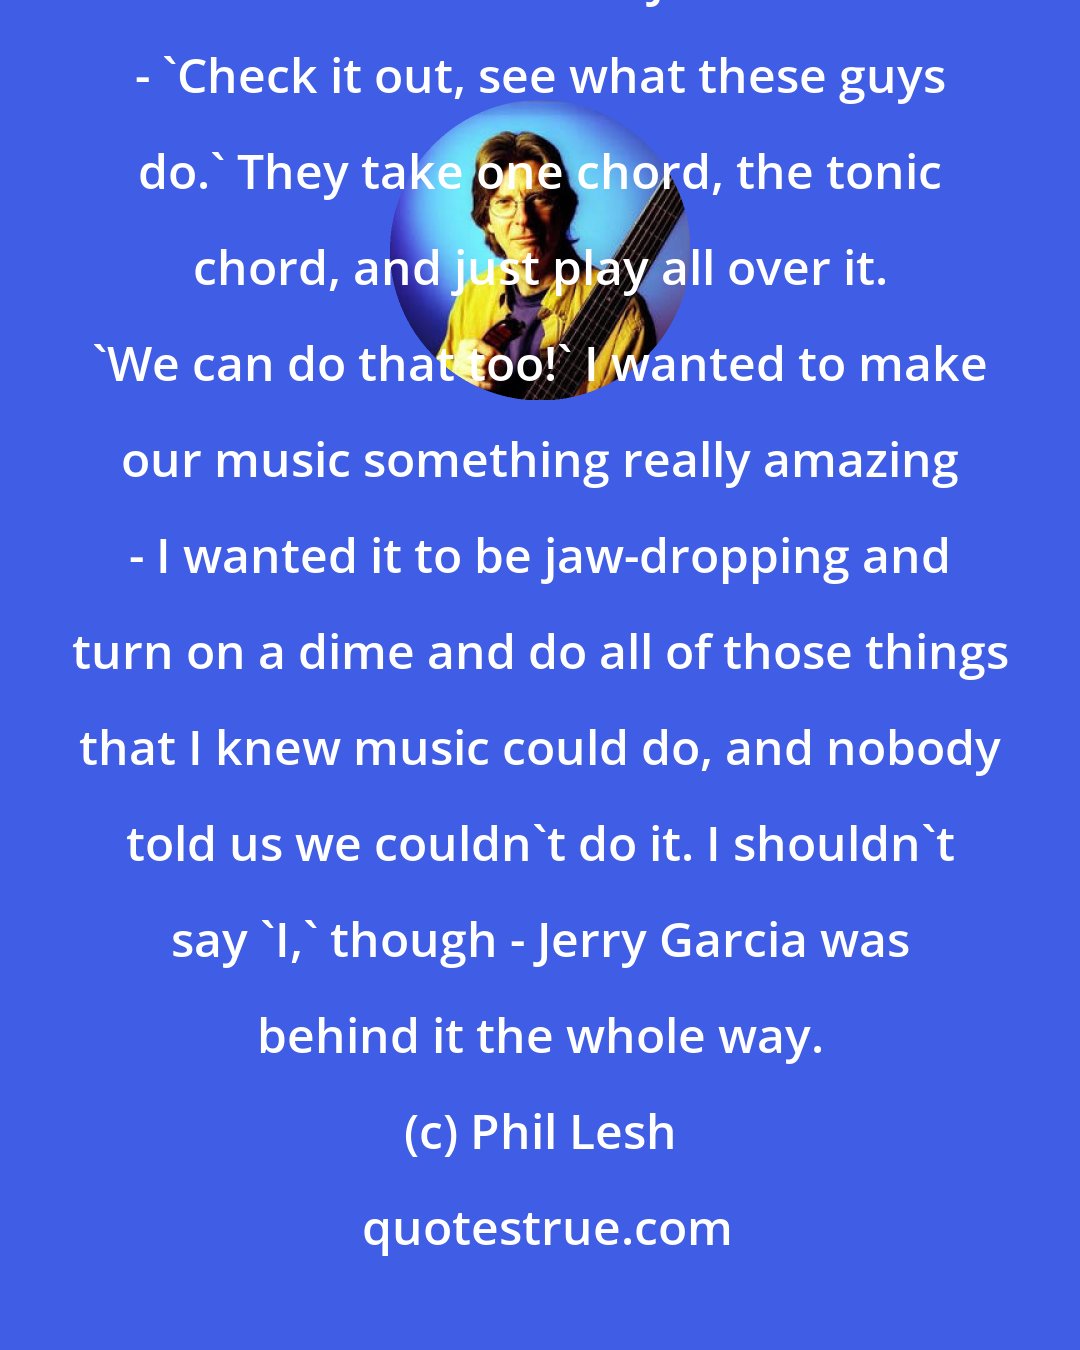 Phil Lesh: ... We borrowed it all from Coltrane. I started encouraging everybody in the band to listen to John Coltrane - 'Check it out, see what these guys do.' They take one chord, the tonic chord, and just play all over it. 'We can do that too!' I wanted to make our music something really amazing - I wanted it to be jaw-dropping and turn on a dime and do all of those things that I knew music could do, and nobody told us we couldn't do it. I shouldn't say 'I,' though - Jerry Garcia was behind it the whole way.